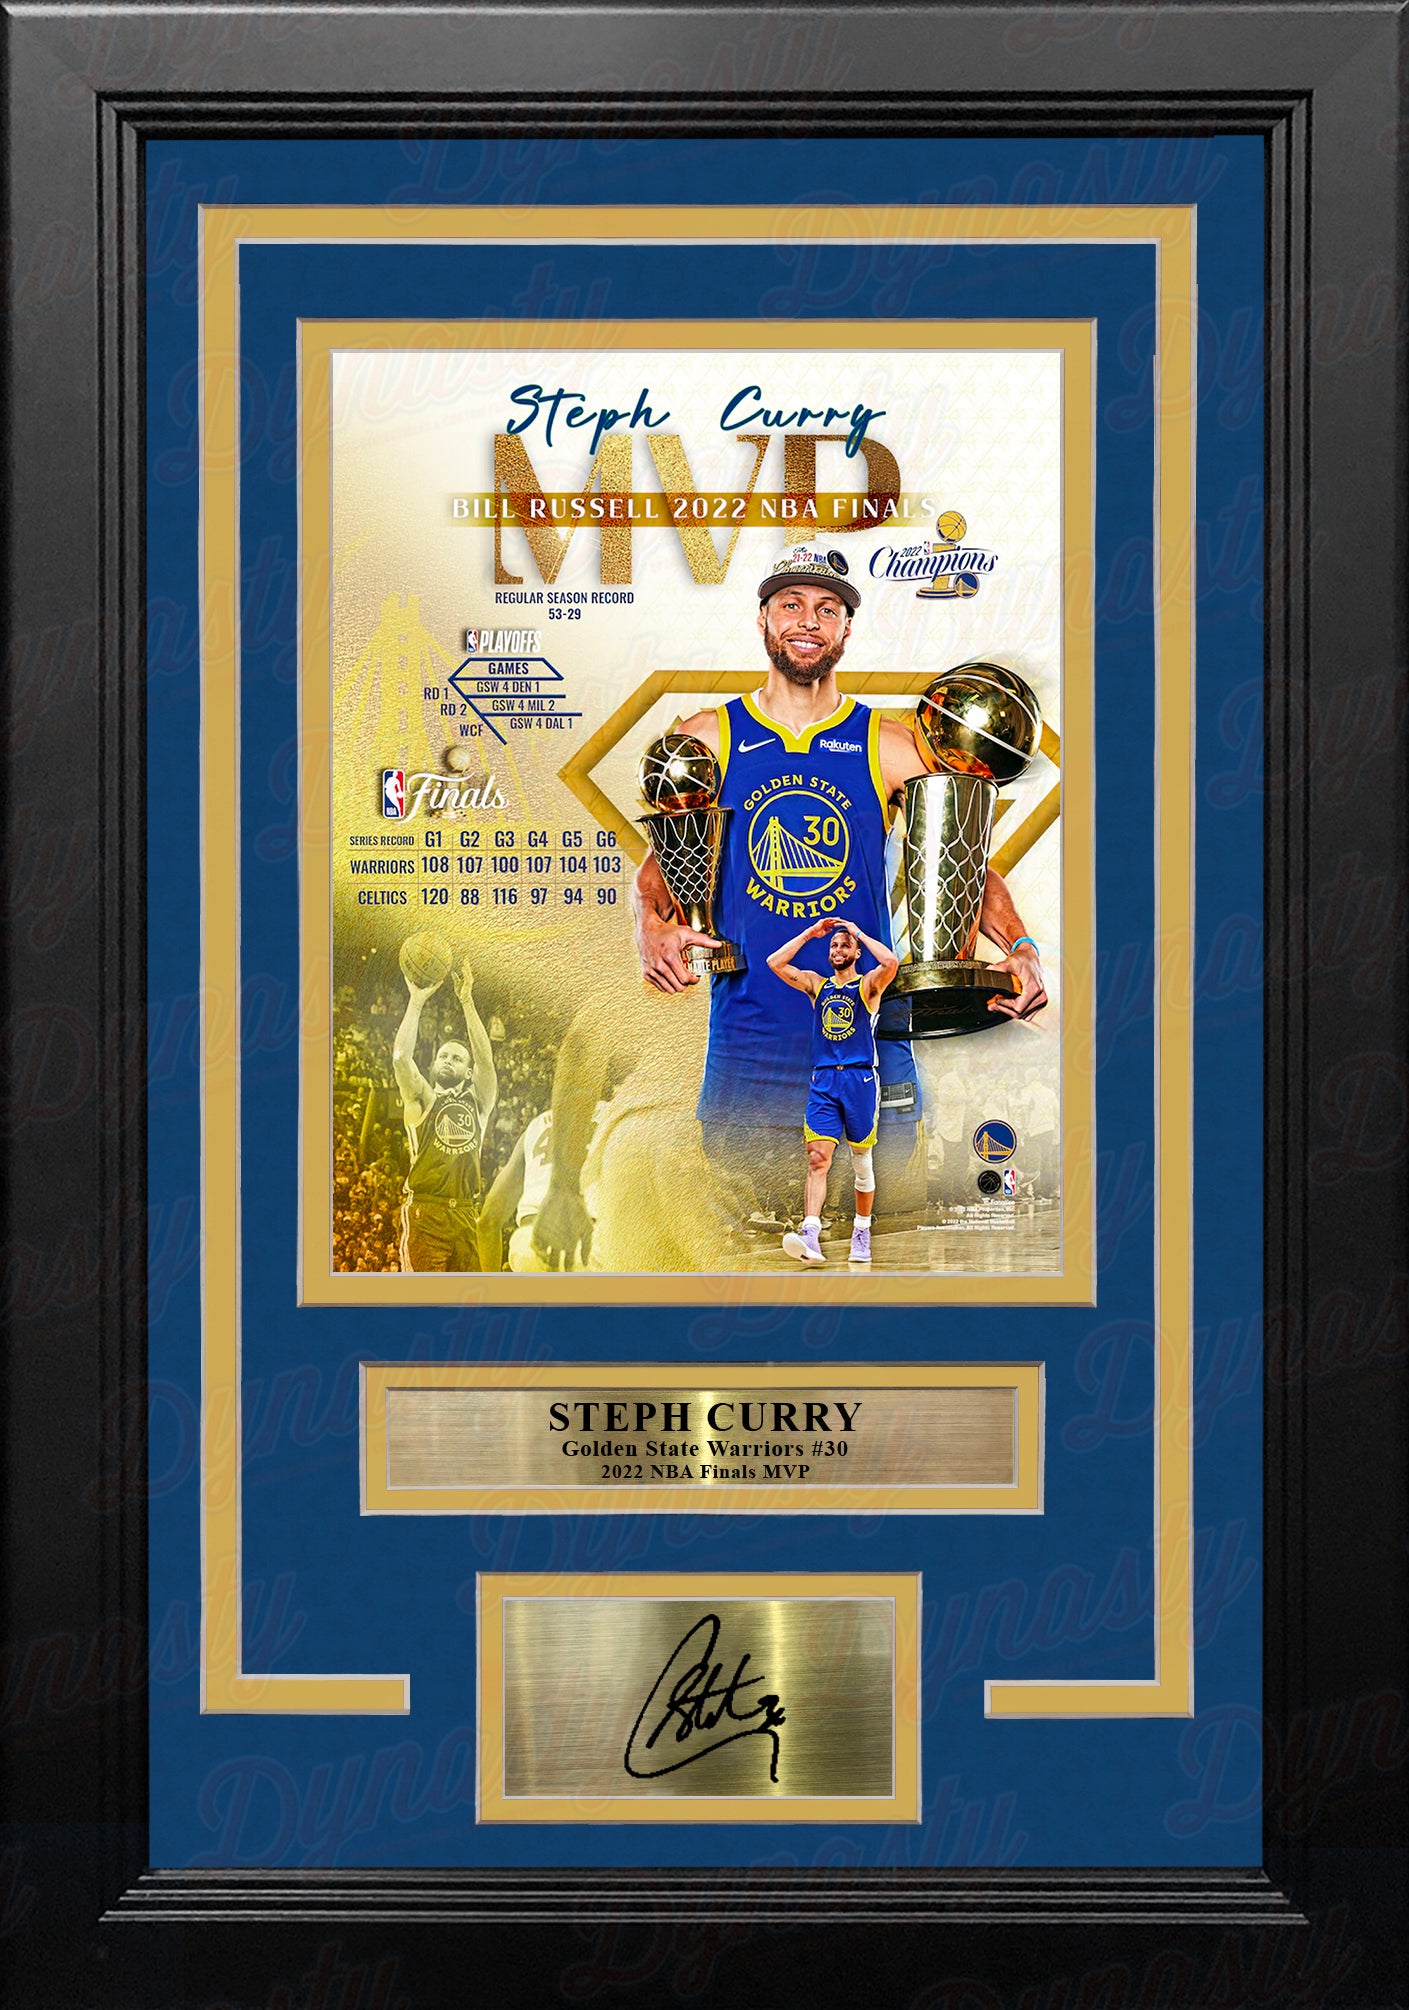 Steph Curry with 3-Point Record Jerseys Golden State Warriors 8 x 10  Framed Basketball Photo